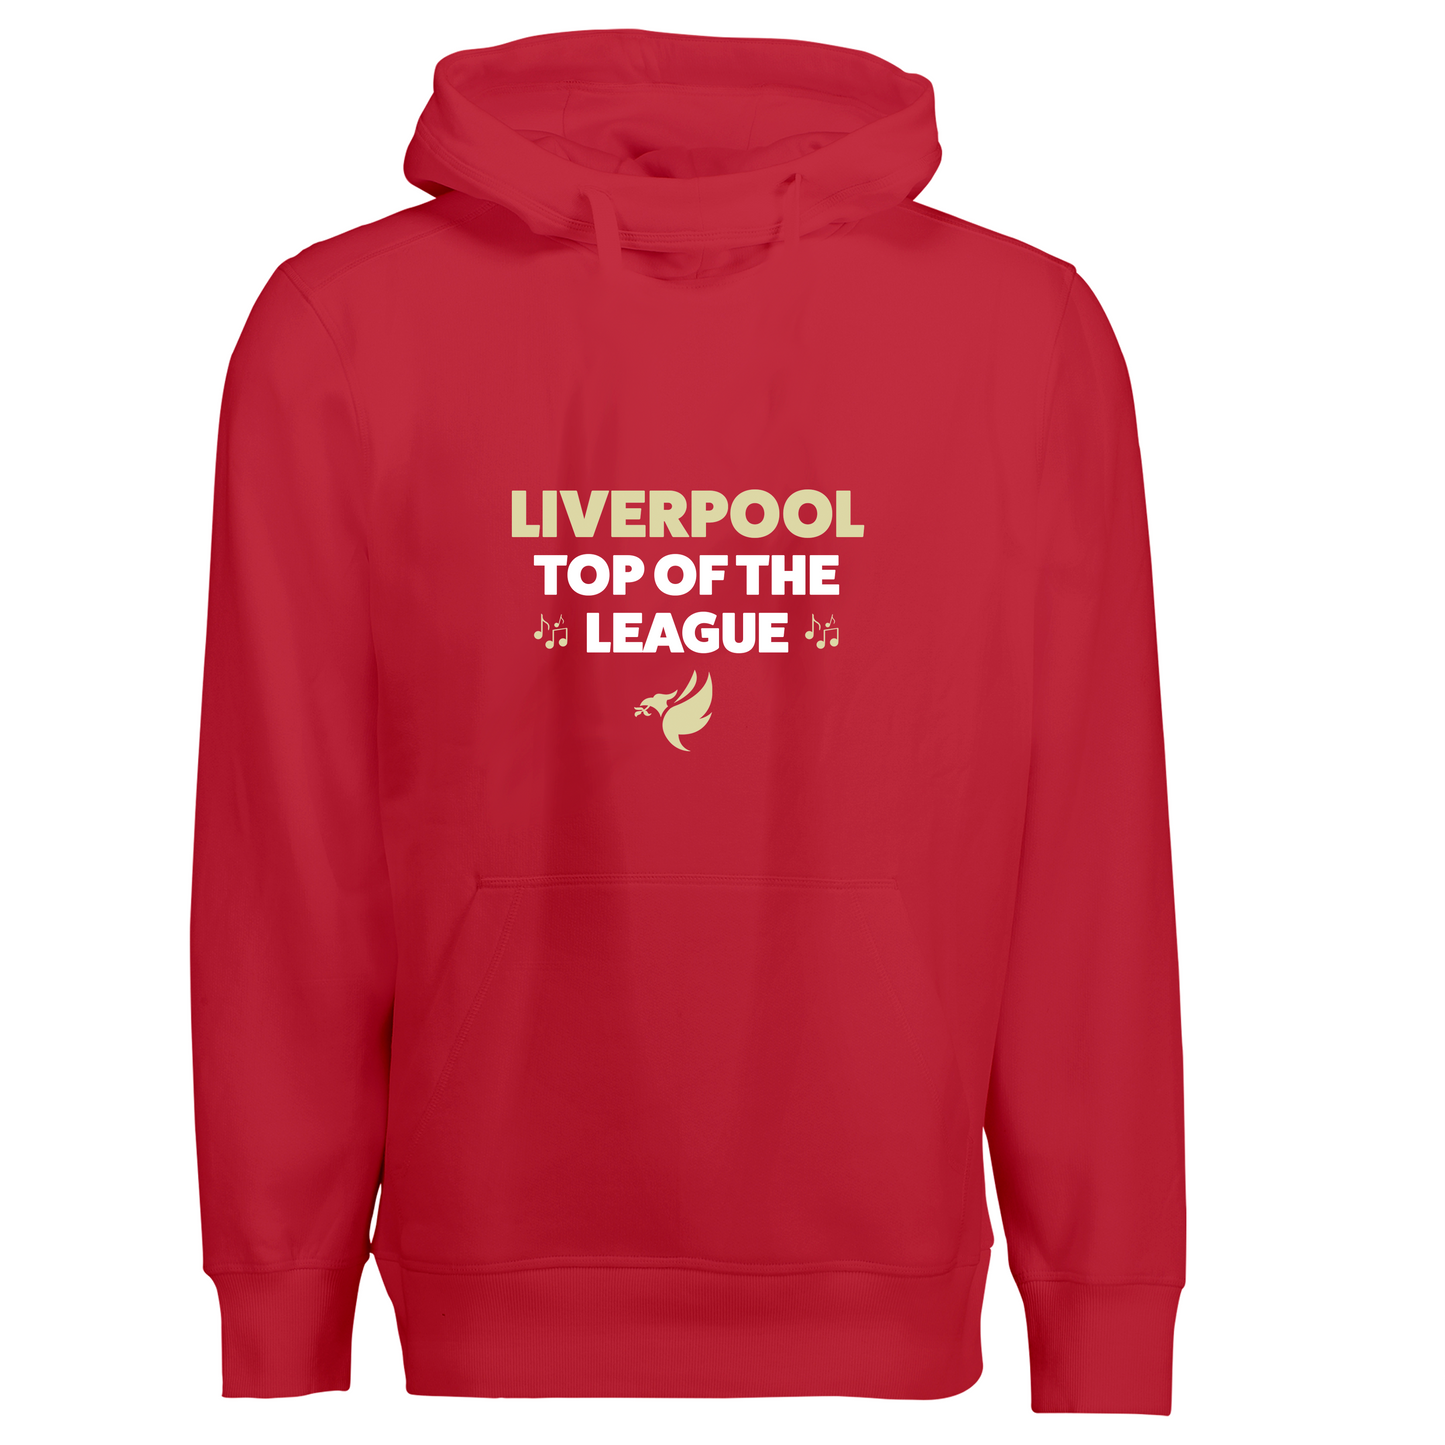 Top of The league - Hoodie